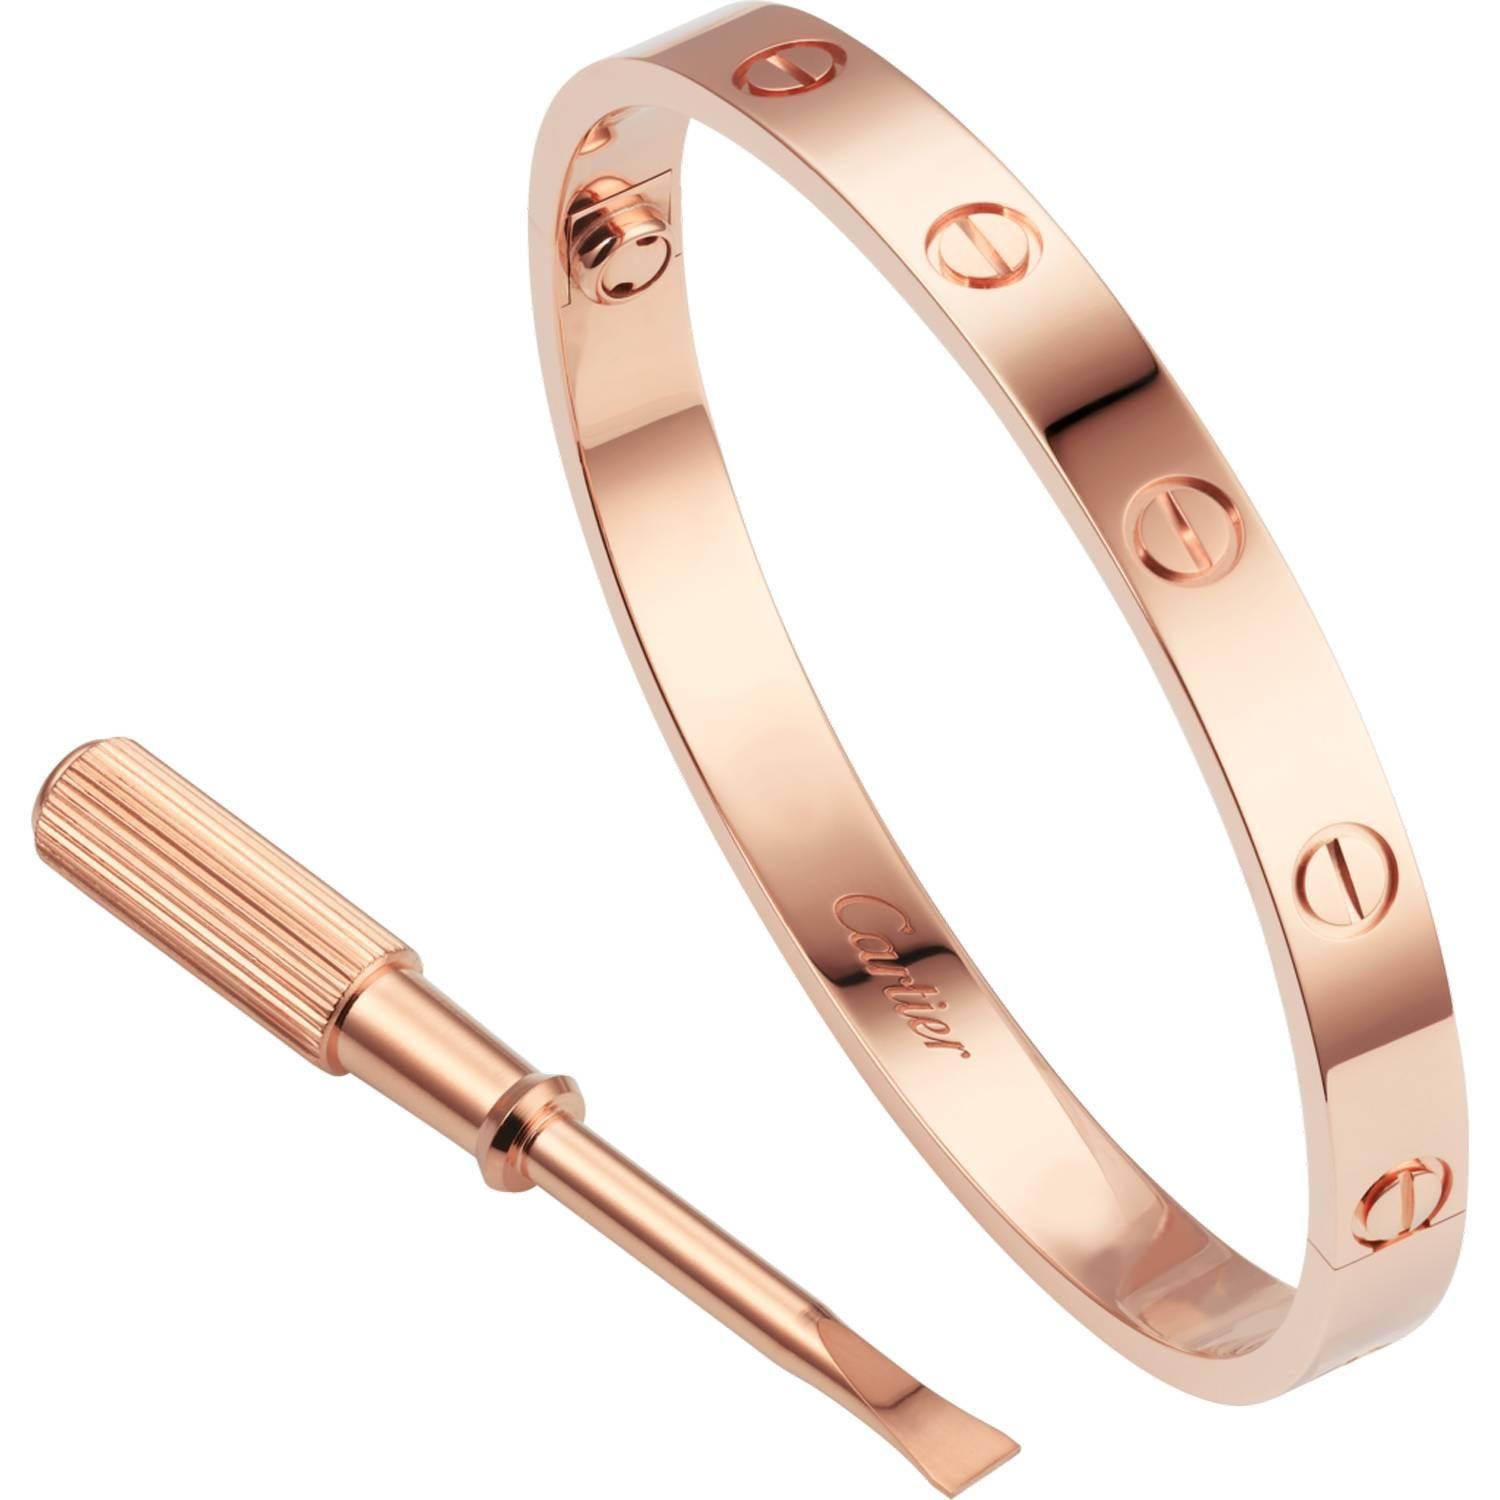 Beautiful Cartier 18k rose gold love bangle, size 16, in like new condition. This bangle has the new screw system and accompanied with the original box and authentication paperwork. The Cartier love collection has created a timeless tribute to the